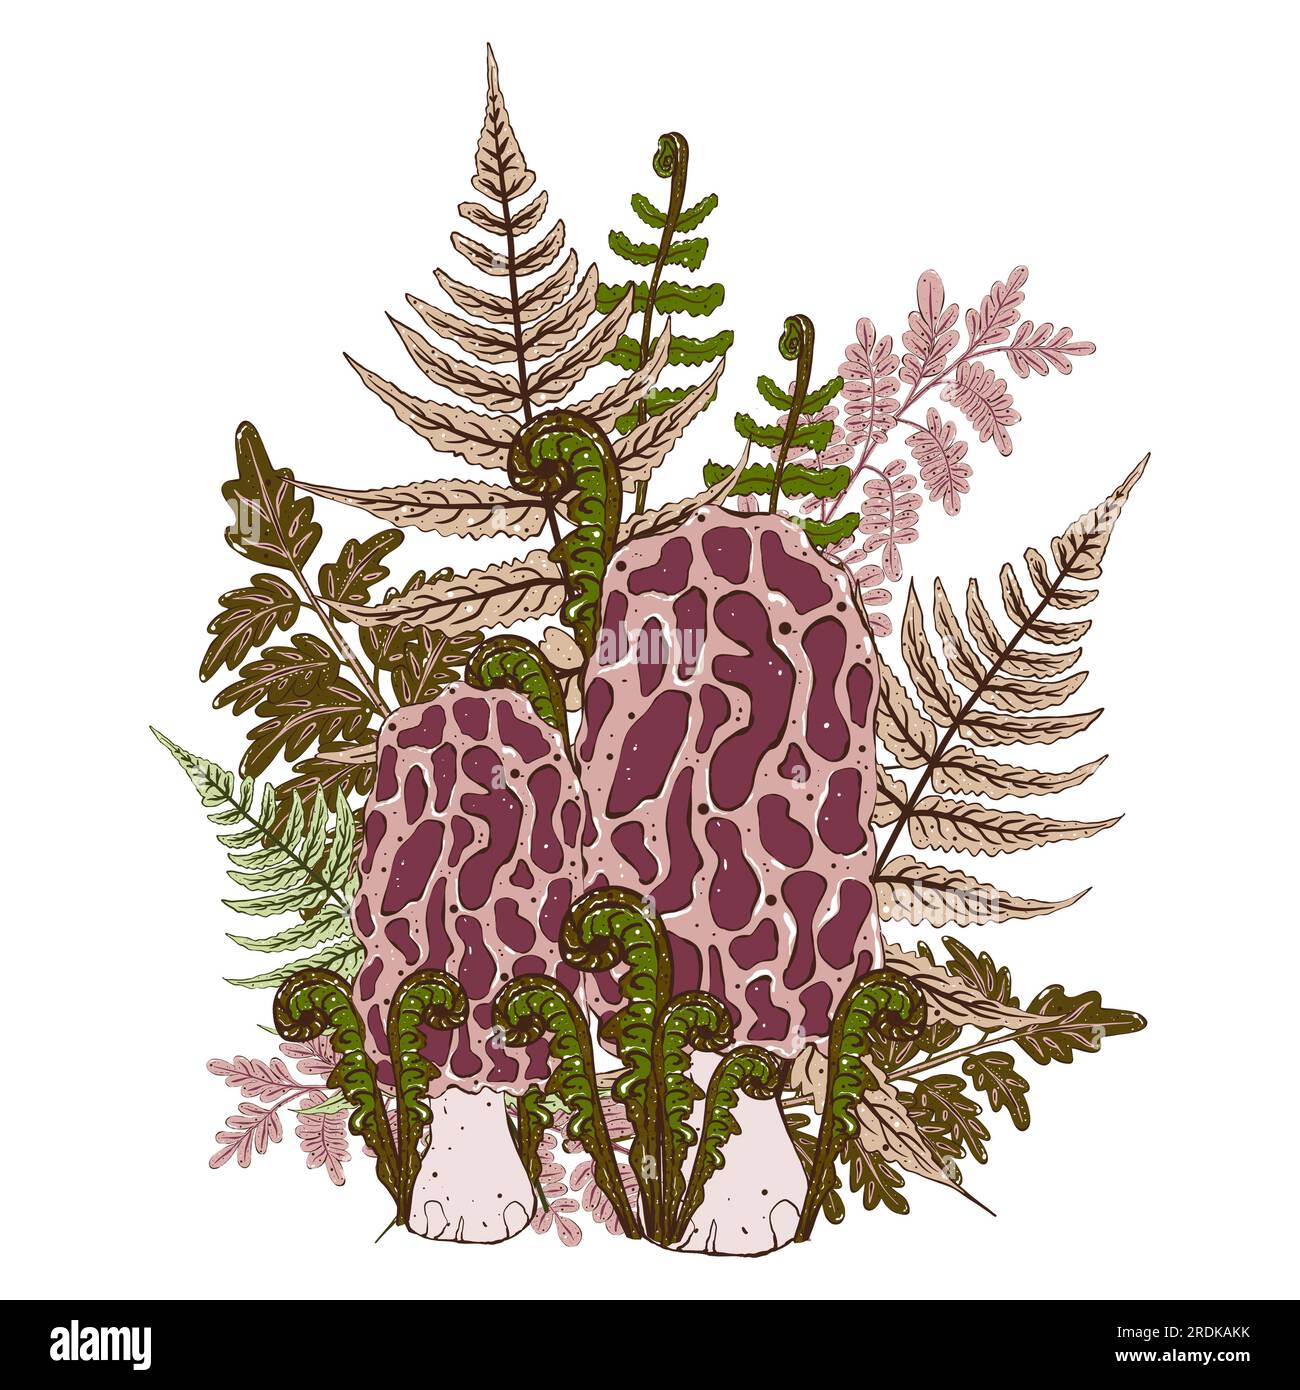 Composition of poisonous mushrooms and fern leaves. Mystical illustration in cartoon style Stock Photo